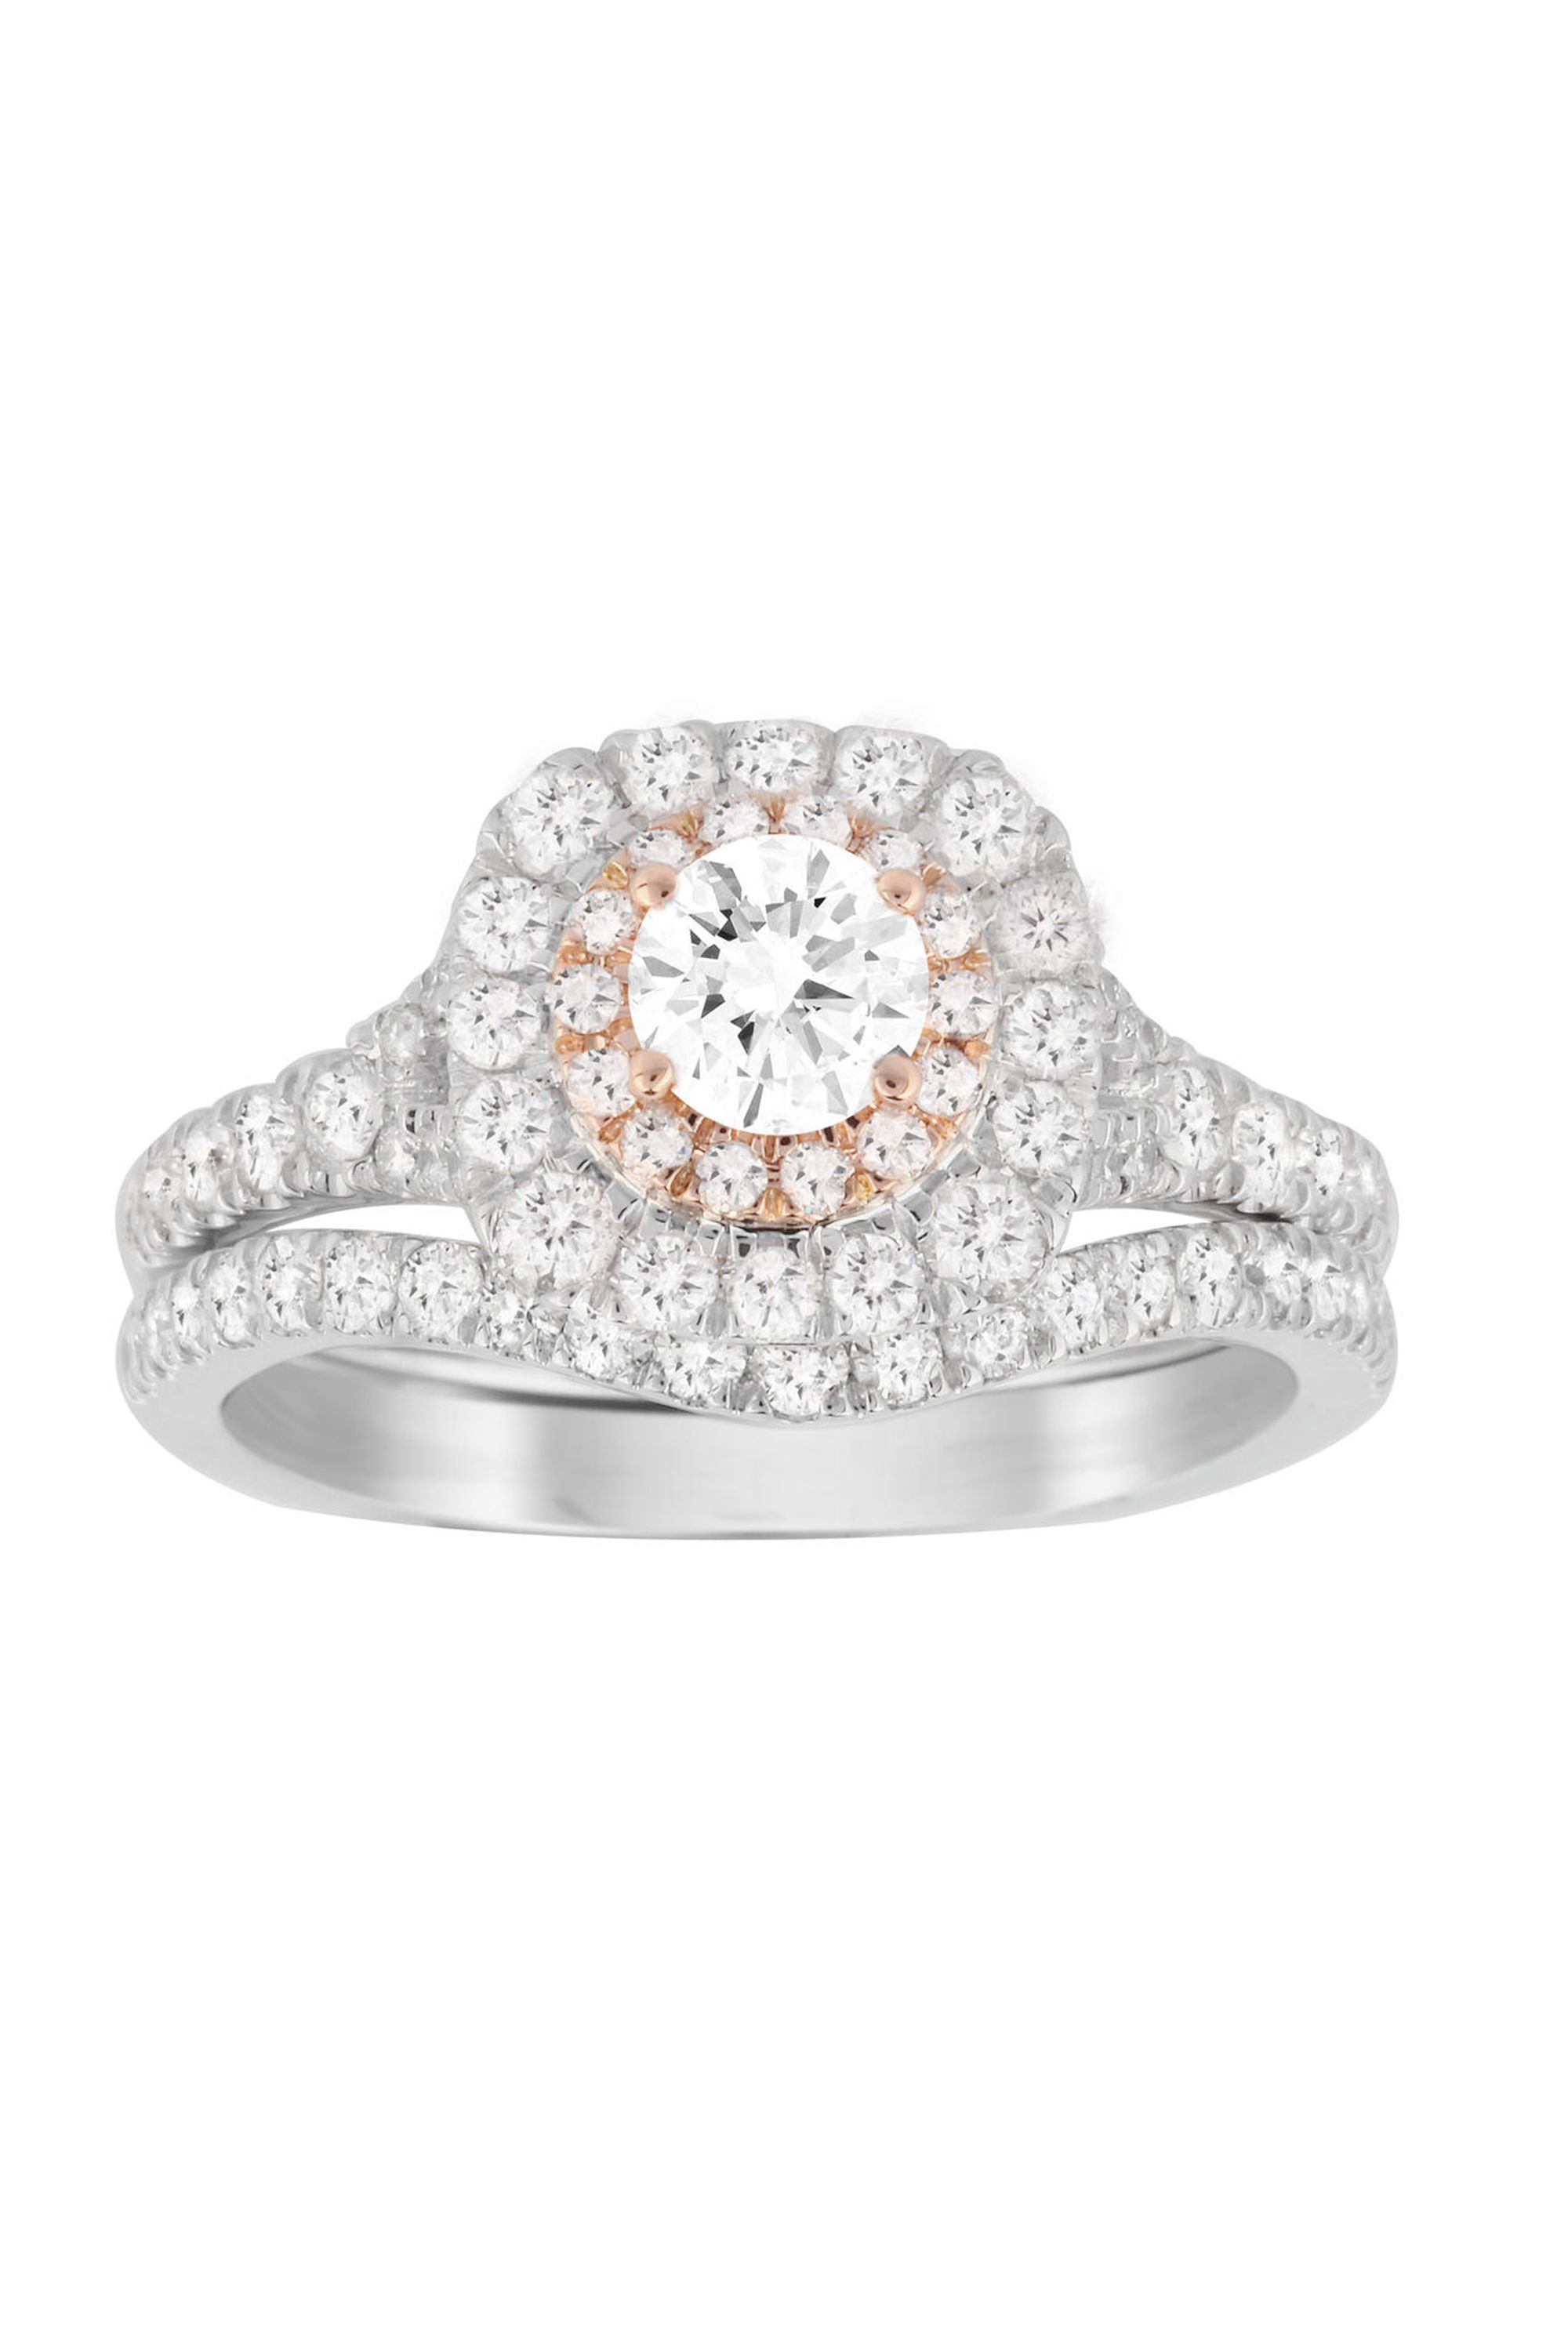 Jenny Packham Brilliant Cut 0.70 Carat Total Weight Doubl ... | Compare |  Cabot Circus